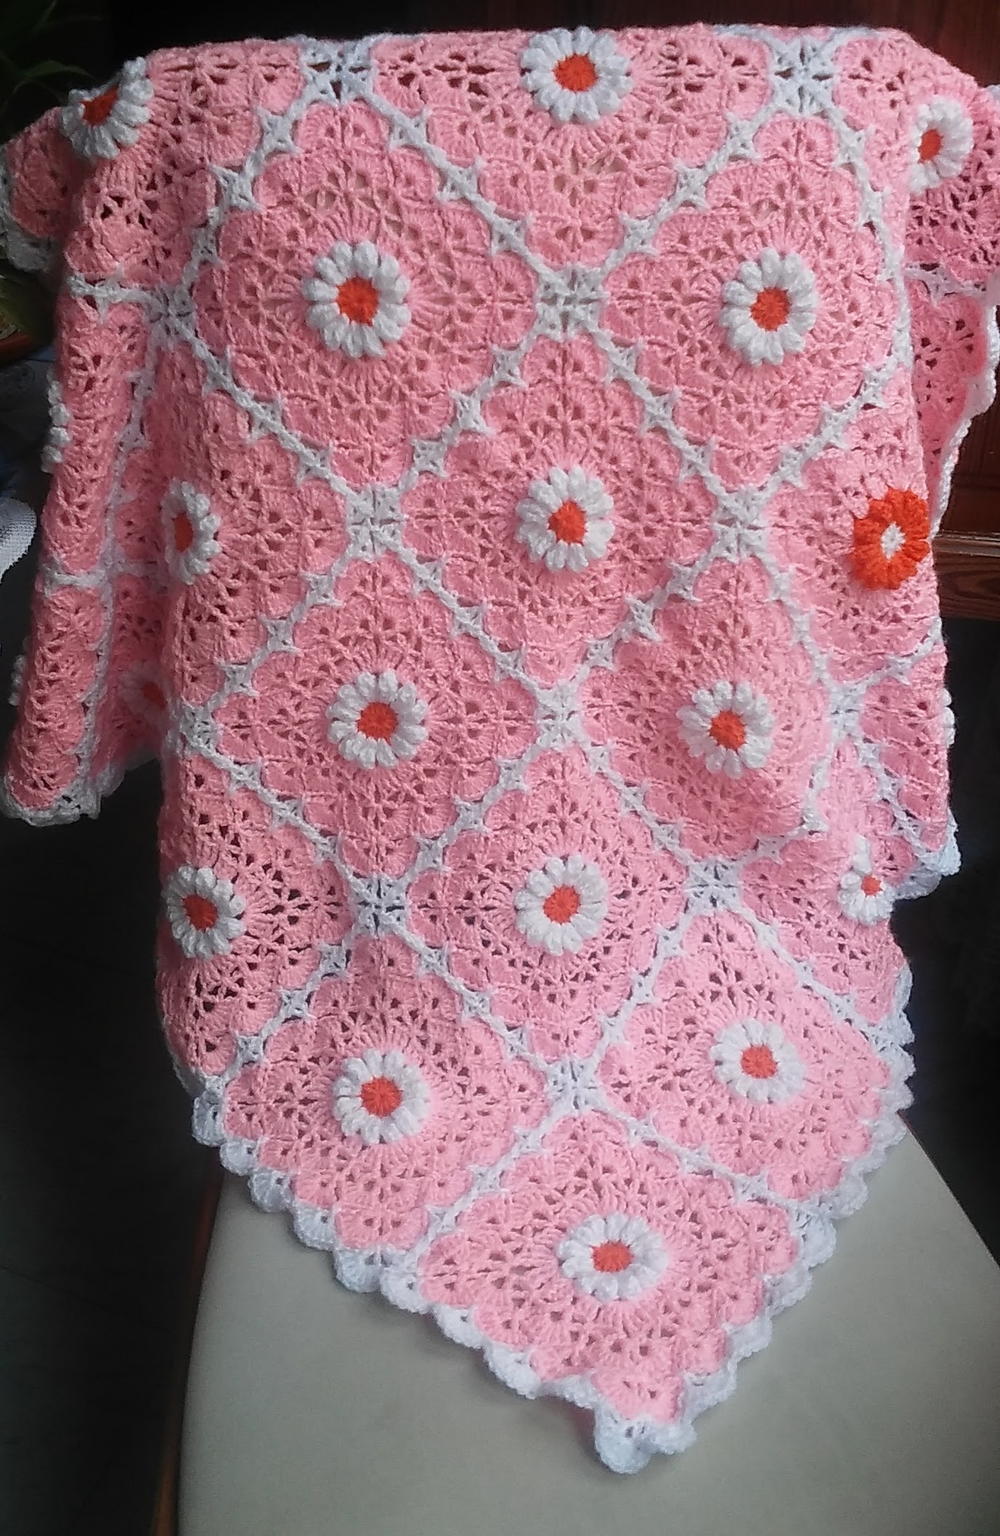 Pink Daisy Crocheted Baby Blanket | FaveCrafts.com